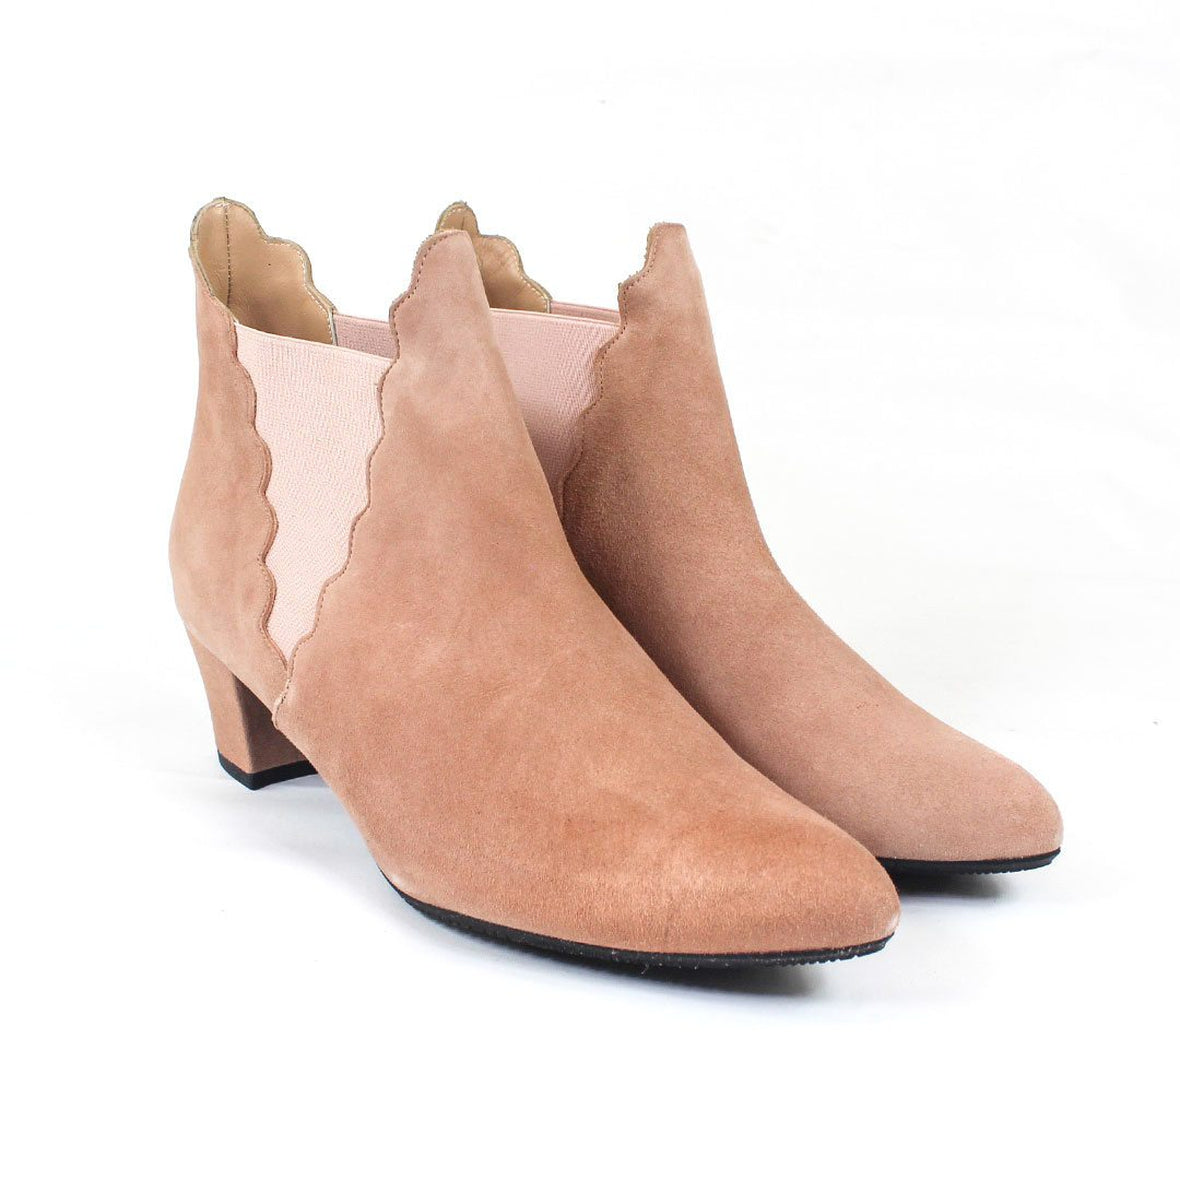 KATERINE Beige Sand Leather Suede